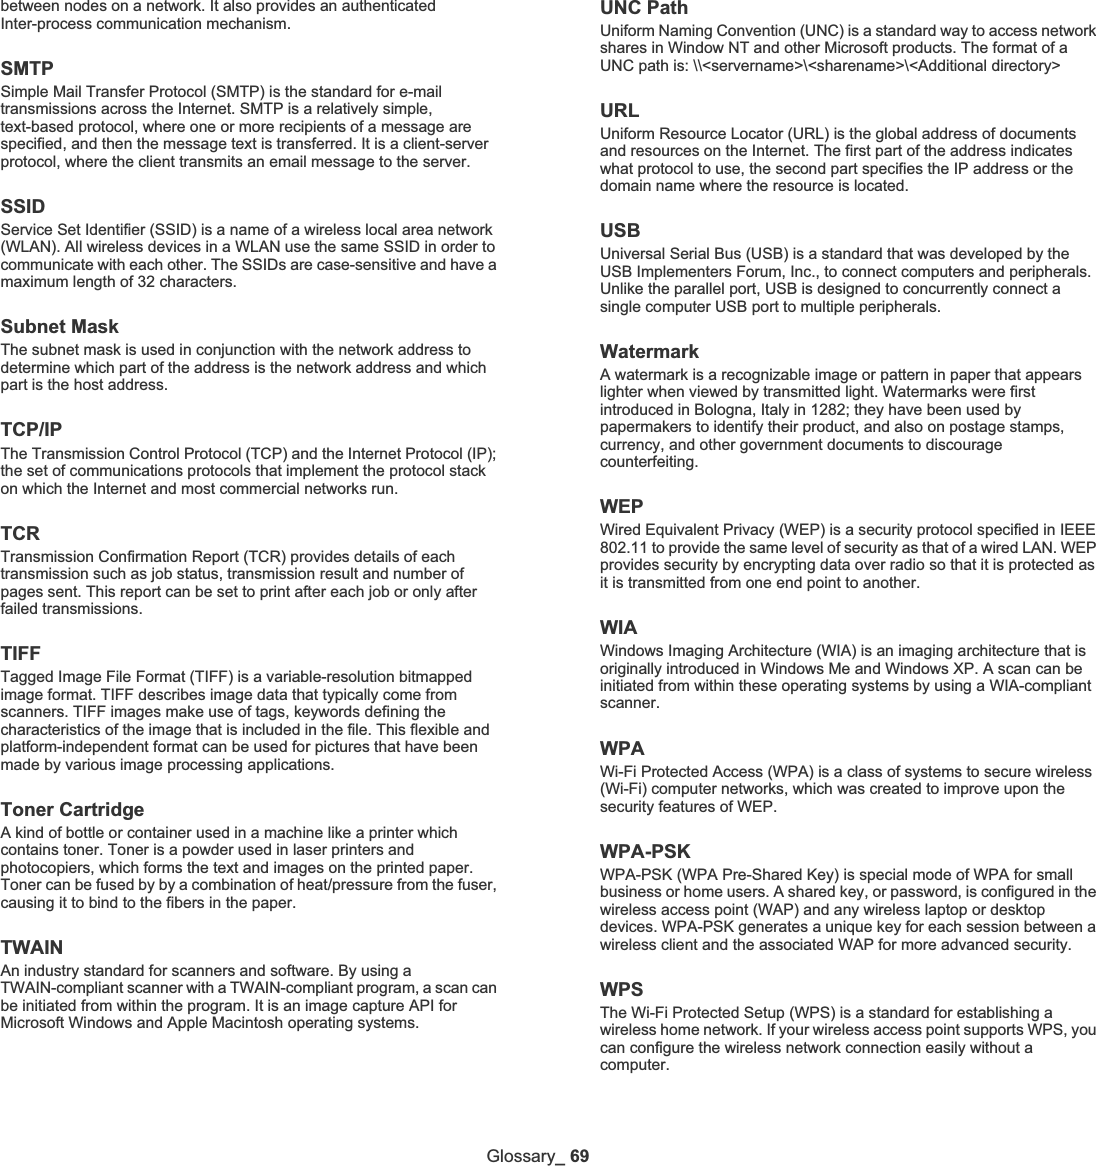 Glossary_ 69between nodes on a network. It also provides an authenticated Inter-process communication mechanism.SMTPSimple Mail Transfer Protocol (SMTP) is the standard for e-mail transmissions across the Internet. SMTP is a relatively simple, text-based protocol, where one or more recipients of a message are specified, and then the message text is transferred. It is a client-server protocol, where the client transmits an email message to the server.SSIDService Set Identifier (SSID) is a name of a wireless local area network (WLAN). All wireless devices in a WLAN use the same SSID in order to communicate with each other. The SSIDs are case-sensitive and have a maximum length of 32 characters.Subnet Mask The subnet mask is used in conjunction with the network address to determine which part of the address is the network address and which part is the host address.TCP/IPThe Transmission Control Protocol (TCP) and the Internet Protocol (IP); the set of communications protocols that implement the protocol stack on which the Internet and most commercial networks run.TCRTransmission Confirmation Report (TCR) provides details of each transmission such as job status, transmission result and number of pages sent. This report can be set to print after each job or only after failed transmissions.TIFFTagged Image File Format (TIFF) is a variable-resolution bitmapped image format. TIFF describes image data that typically come from scanners. TIFF images make use of tags, keywords defining the characteristics of the image that is included in the file. This flexible and platform-independent format can be used for pictures that have been made by various image processing applications.Toner CartridgeA kind of bottle or container used in a machine like a printer which contains toner. Toner is a powder used in laser printers and photocopiers, which forms the text and images on the printed paper. Toner can be fused by by a combination of heat/pressure from the fuser, causing it to bind to the fibers in the paper.TWAINAn industry standard for scanners and software. By using a TWAIN-compliant scanner with a TWAIN-compliant program, a scan can be initiated from within the program. It is an image capture API for Microsoft Windows and Apple Macintosh operating systems.UNC PathUniform Naming Convention (UNC) is a standard way to access network shares in Window NT and other Microsoft products. The format of a UNC path is: \\&lt;servername&gt;\&lt;sharename&gt;\&lt;Additional directory&gt;URLUniform Resource Locator (URL) is the global address of documents and resources on the Internet. The first part of the address indicates what protocol to use, the second part specifies the IP address or the domain name where the resource is located.USBUniversal Serial Bus (USB) is a standard that was developed by the USB Implementers Forum, Inc., to connect computers and peripherals. Unlike the parallel port, USB is designed to concurrently connect a single computer USB port to multiple peripherals.WatermarkA watermark is a recognizable image or pattern in paper that appears lighter when viewed by transmitted light. Watermarks were first introduced in Bologna, Italy in 1282; they have been used by papermakers to identify their product, and also on postage stamps, currency, and other government documents to discourage counterfeiting.WEPWired Equivalent Privacy (WEP) is a security protocol specified in IEEE 802.11 to provide the same level of security as that of a wired LAN. WEP provides security by encrypting data over radio so that it is protected as it is transmitted from one end point to another.WIAWindows Imaging Architecture (WIA) is an imaging architecture that is originally introduced in Windows Me and Windows XP. A scan can be initiated from within these operating systems by using a WIA-compliant scanner.WPAWi-Fi Protected Access (WPA) is a class of systems to secure wireless (Wi-Fi) computer networks, which was created to improve upon the security features of WEP.WPA-PSKWPA-PSK (WPA Pre-Shared Key) is special mode of WPA for small business or home users. A shared key, or password, is configured in the wireless access point (WAP) and any wireless laptop or desktop devices. WPA-PSK generates a unique key for each session between a wireless client and the associated WAP for more advanced security.WPSThe Wi-Fi Protected Setup (WPS) is a standard for establishing a wireless home network. If your wireless access point supports WPS, you can configure the wireless network connection easily without a computer.